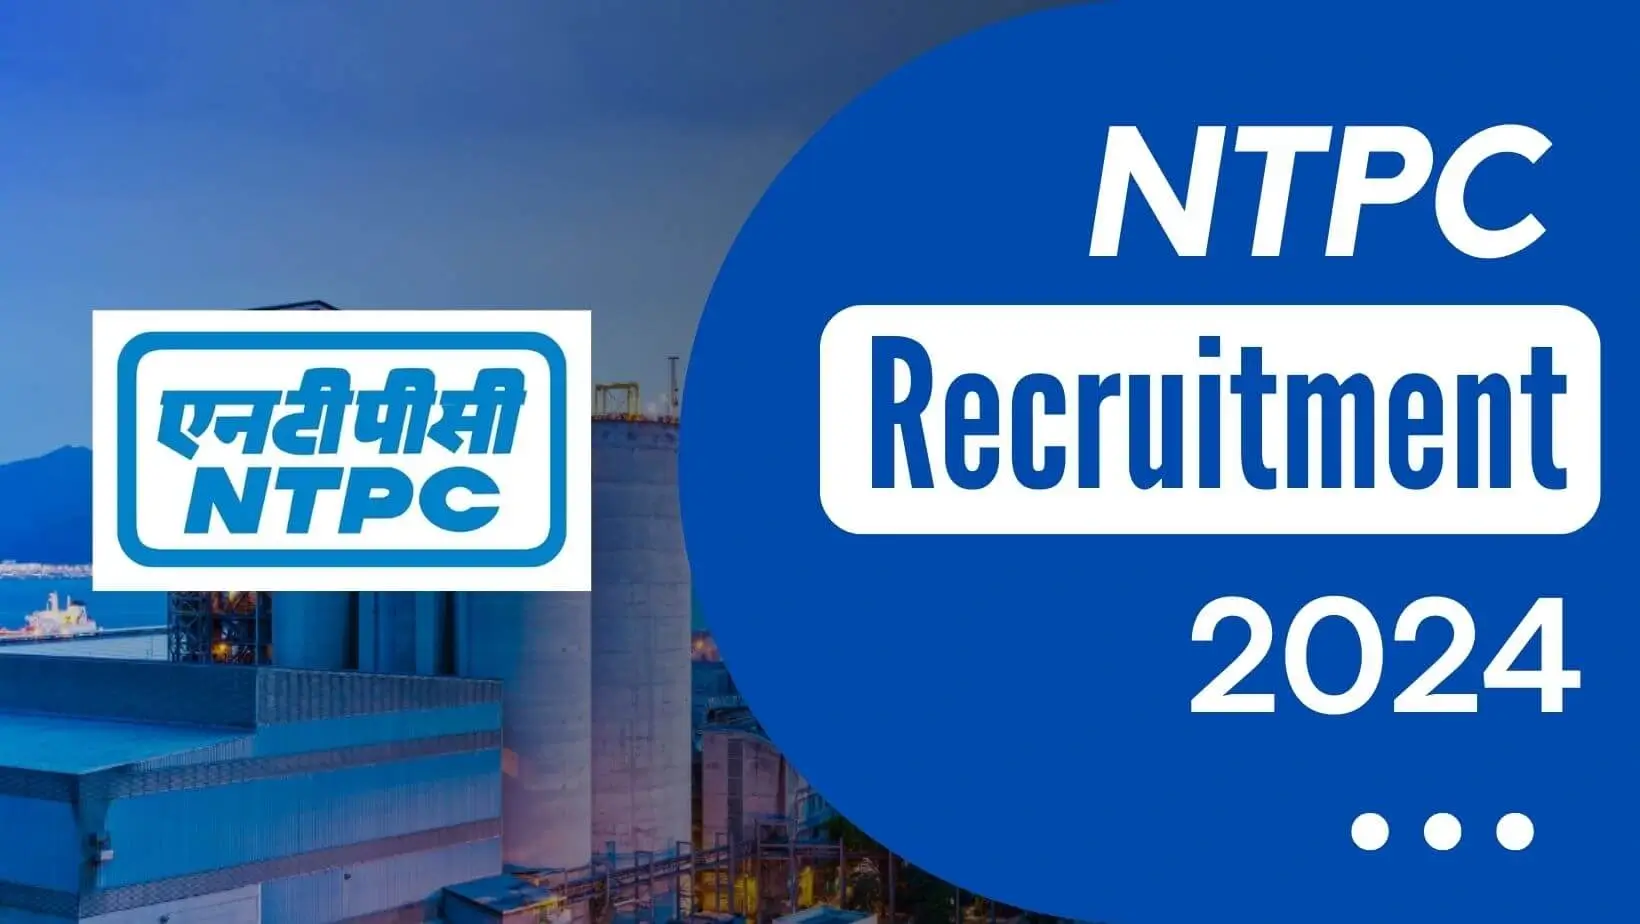 NTPC Recruitment 2024 Notification Out for medical field. Here are the details of recruitment like dates, salary, eligibility criteria, age.